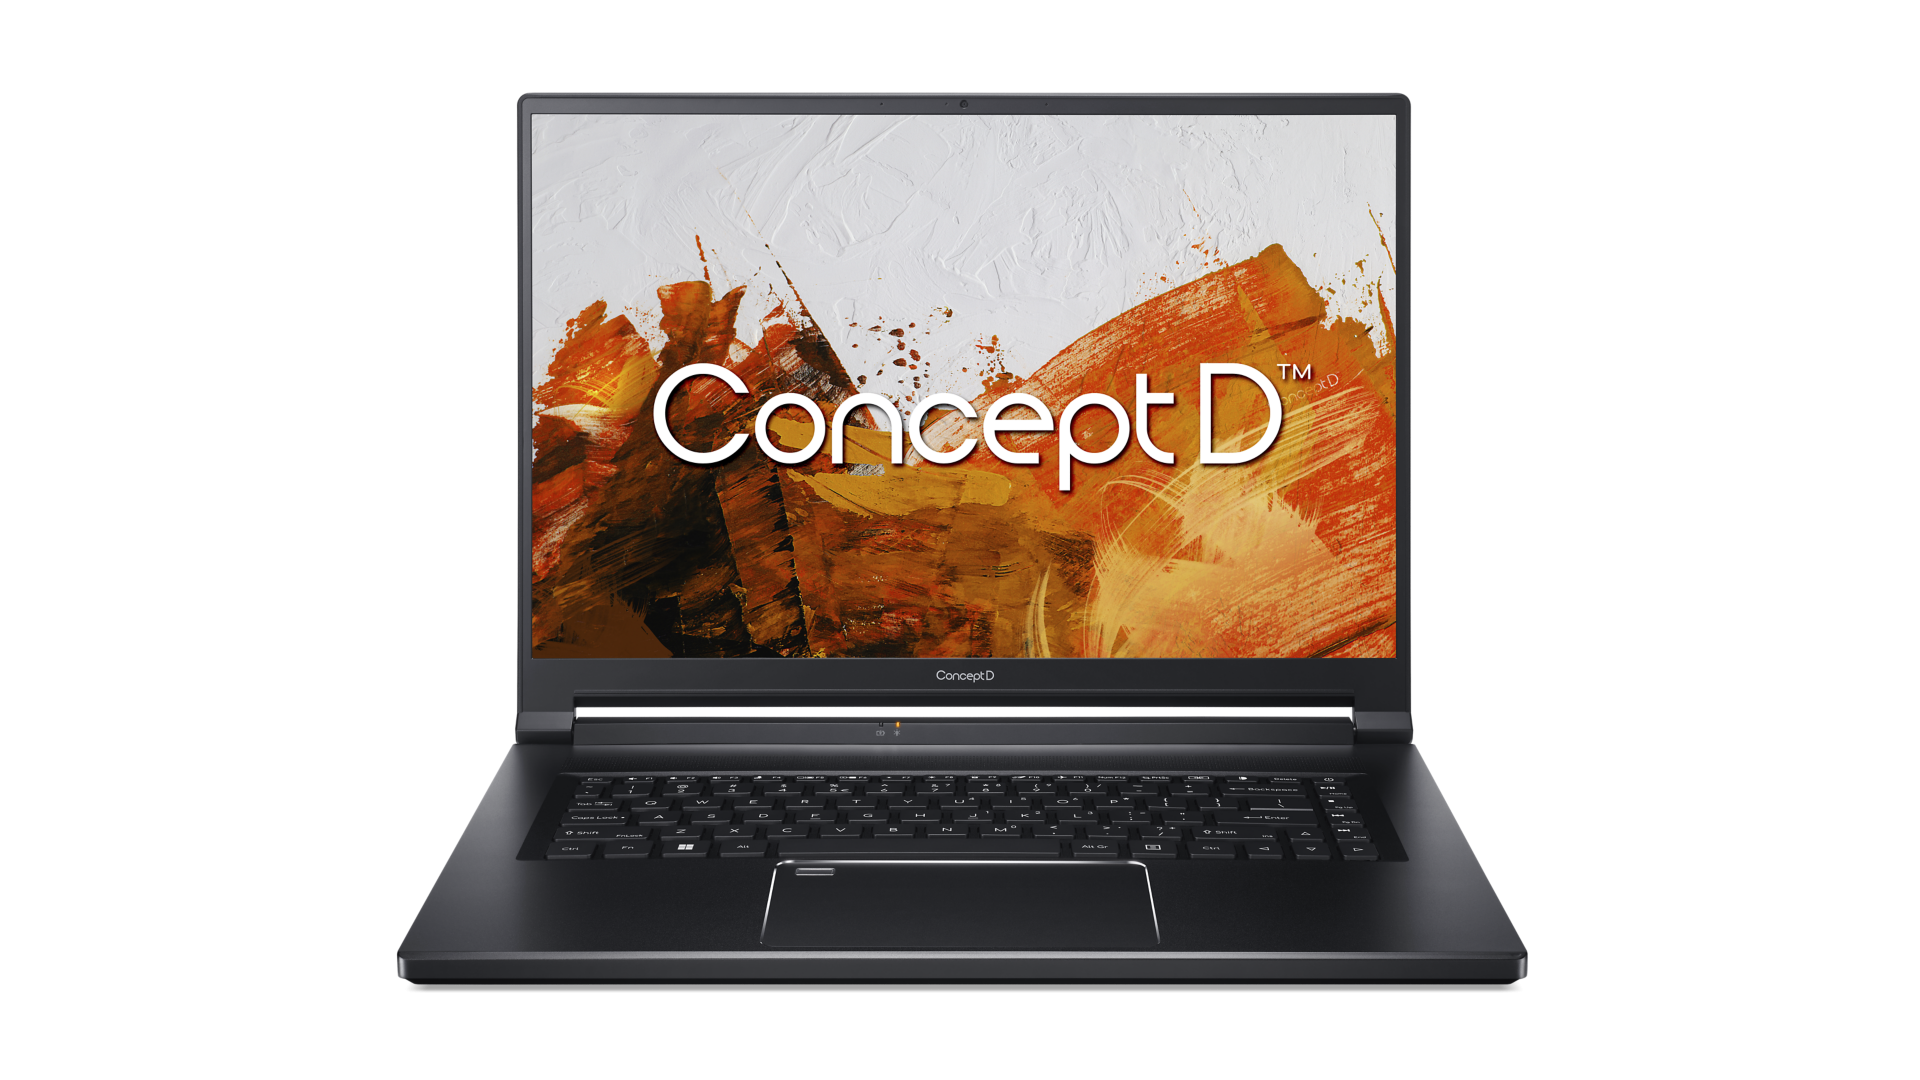 Laptop Acer ConceptD 5 CN516-73G, 16.0" display with IPS (In-Plane Switching) technology, 3072 x 1920, high-brightness (400 nits) Acer ComfyView LED-backlit TFT LCD, 16:10 aspect ratio, DCI-P3 100%, Wide viewing angle up to 170 degrees, Ultra-slim design, Mercury free, environment friendly, Intel